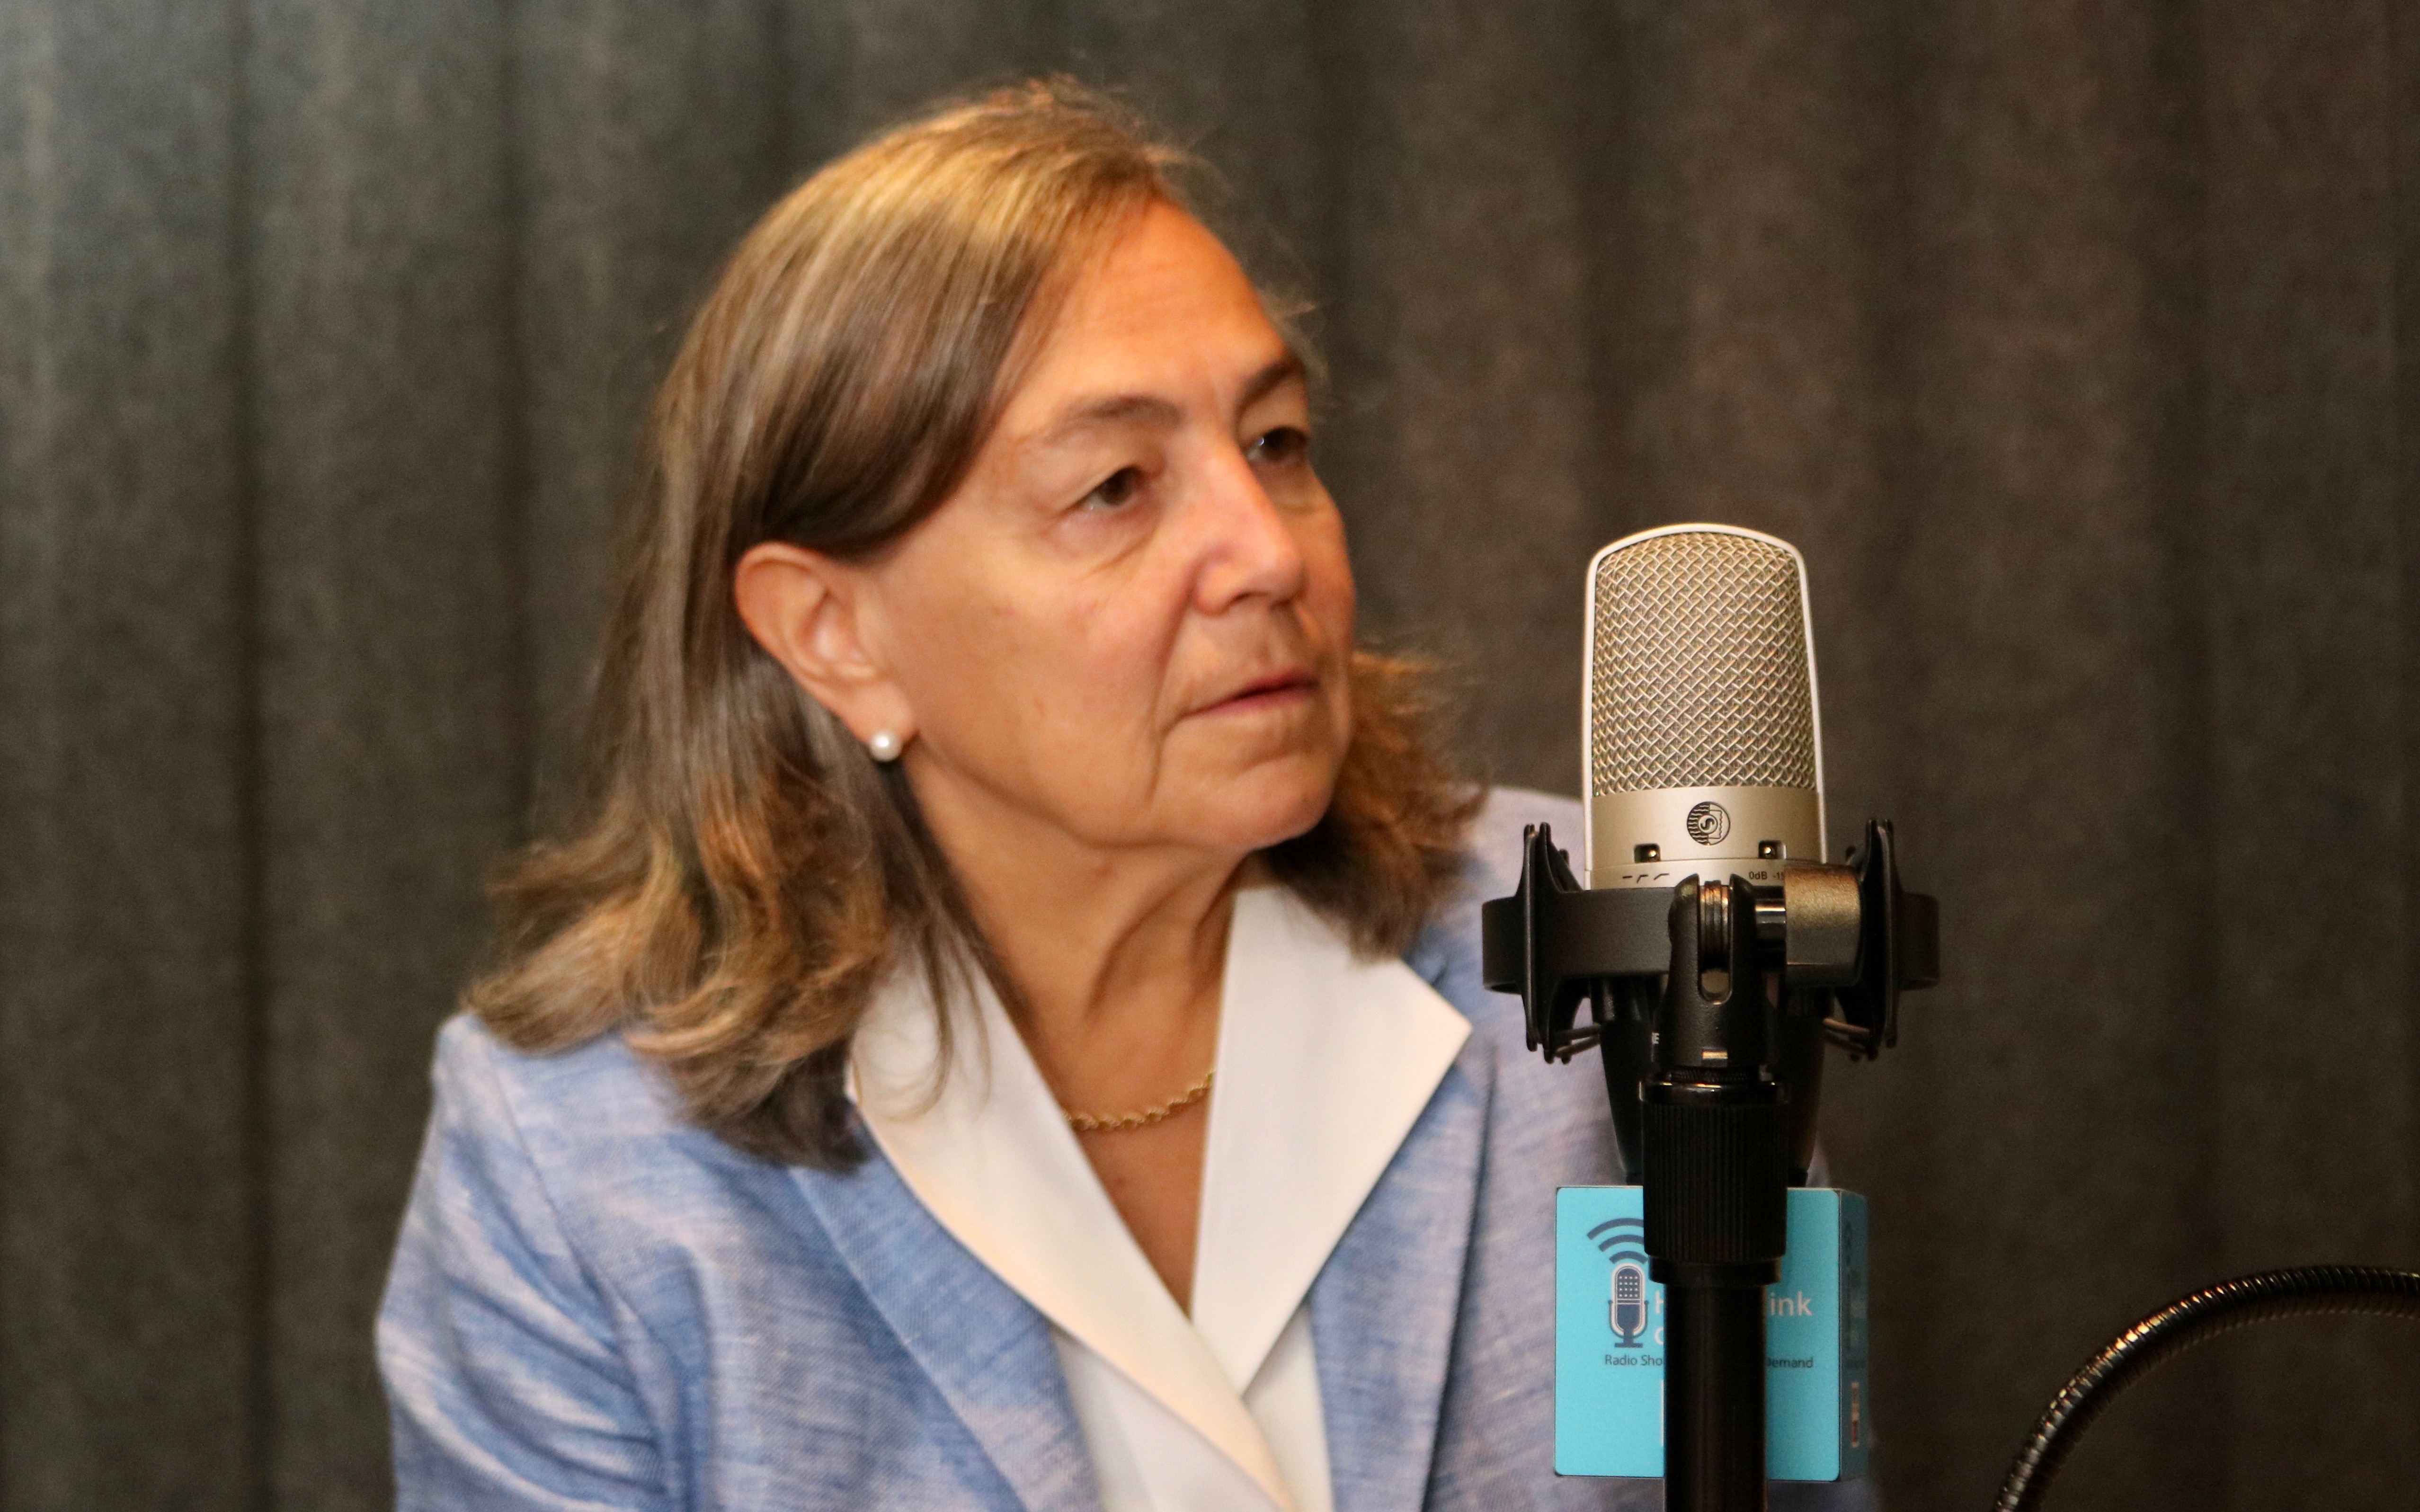 Wendy Levinson. MD, says more is not necessarily better when it comes to medical care. She is shown during an interview with Upstate's "HealthLink on Air" podcast and radio show. (photo by Jim Howe)